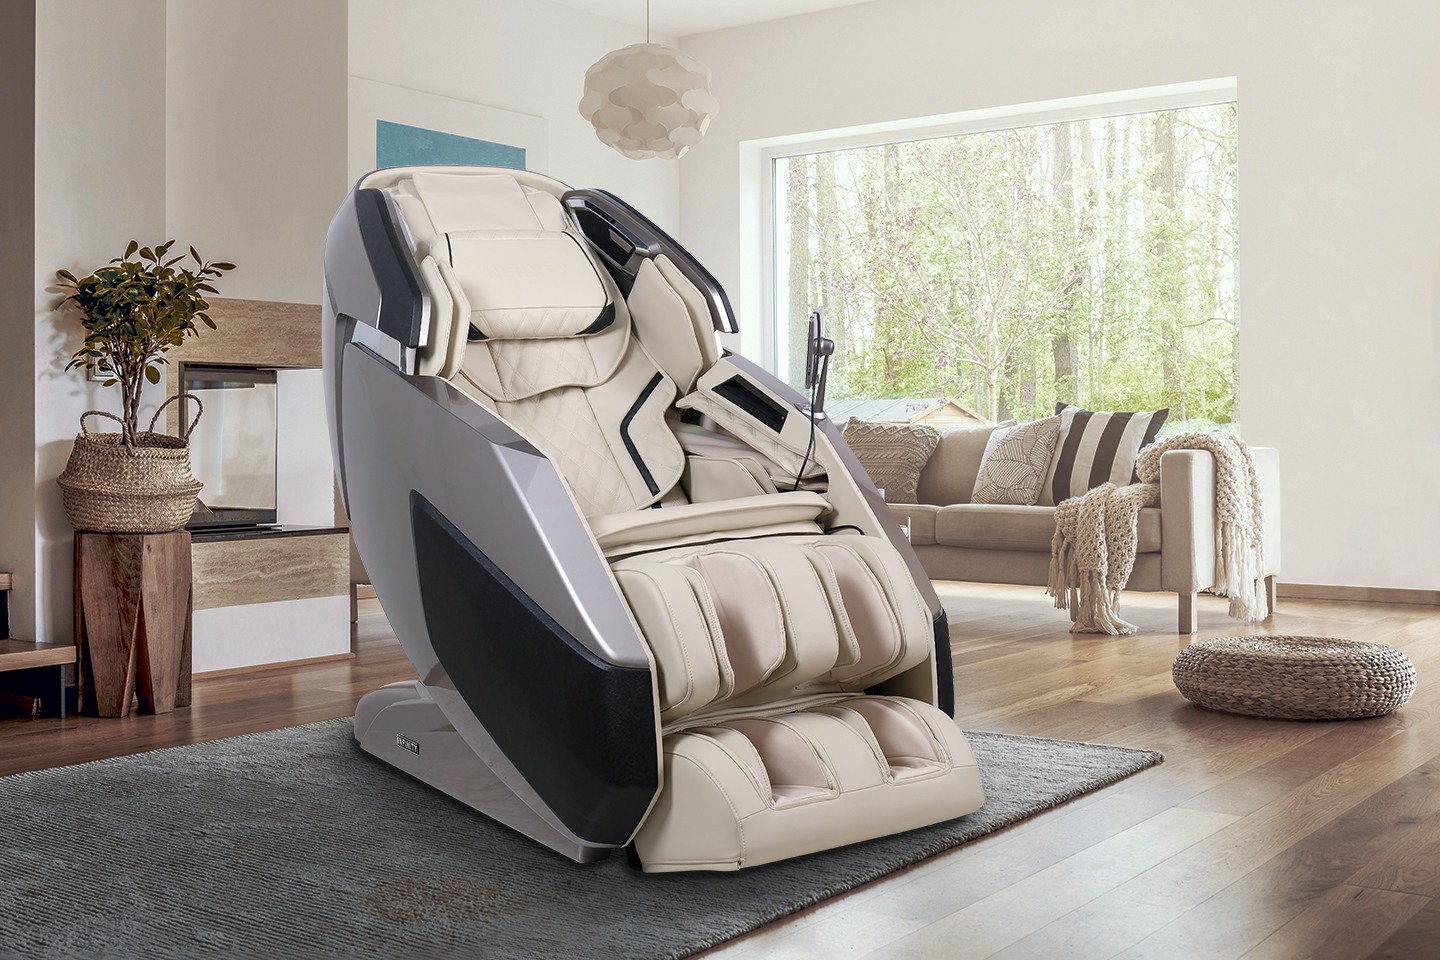 https://res.cloudinary.com/infinity-massage-chairs/image/upload/f_auto,q_auto:best/v1682710879/Infinity_Imperial_Hero_Lifestyle_White_1440x960_zk1vmt.jpg